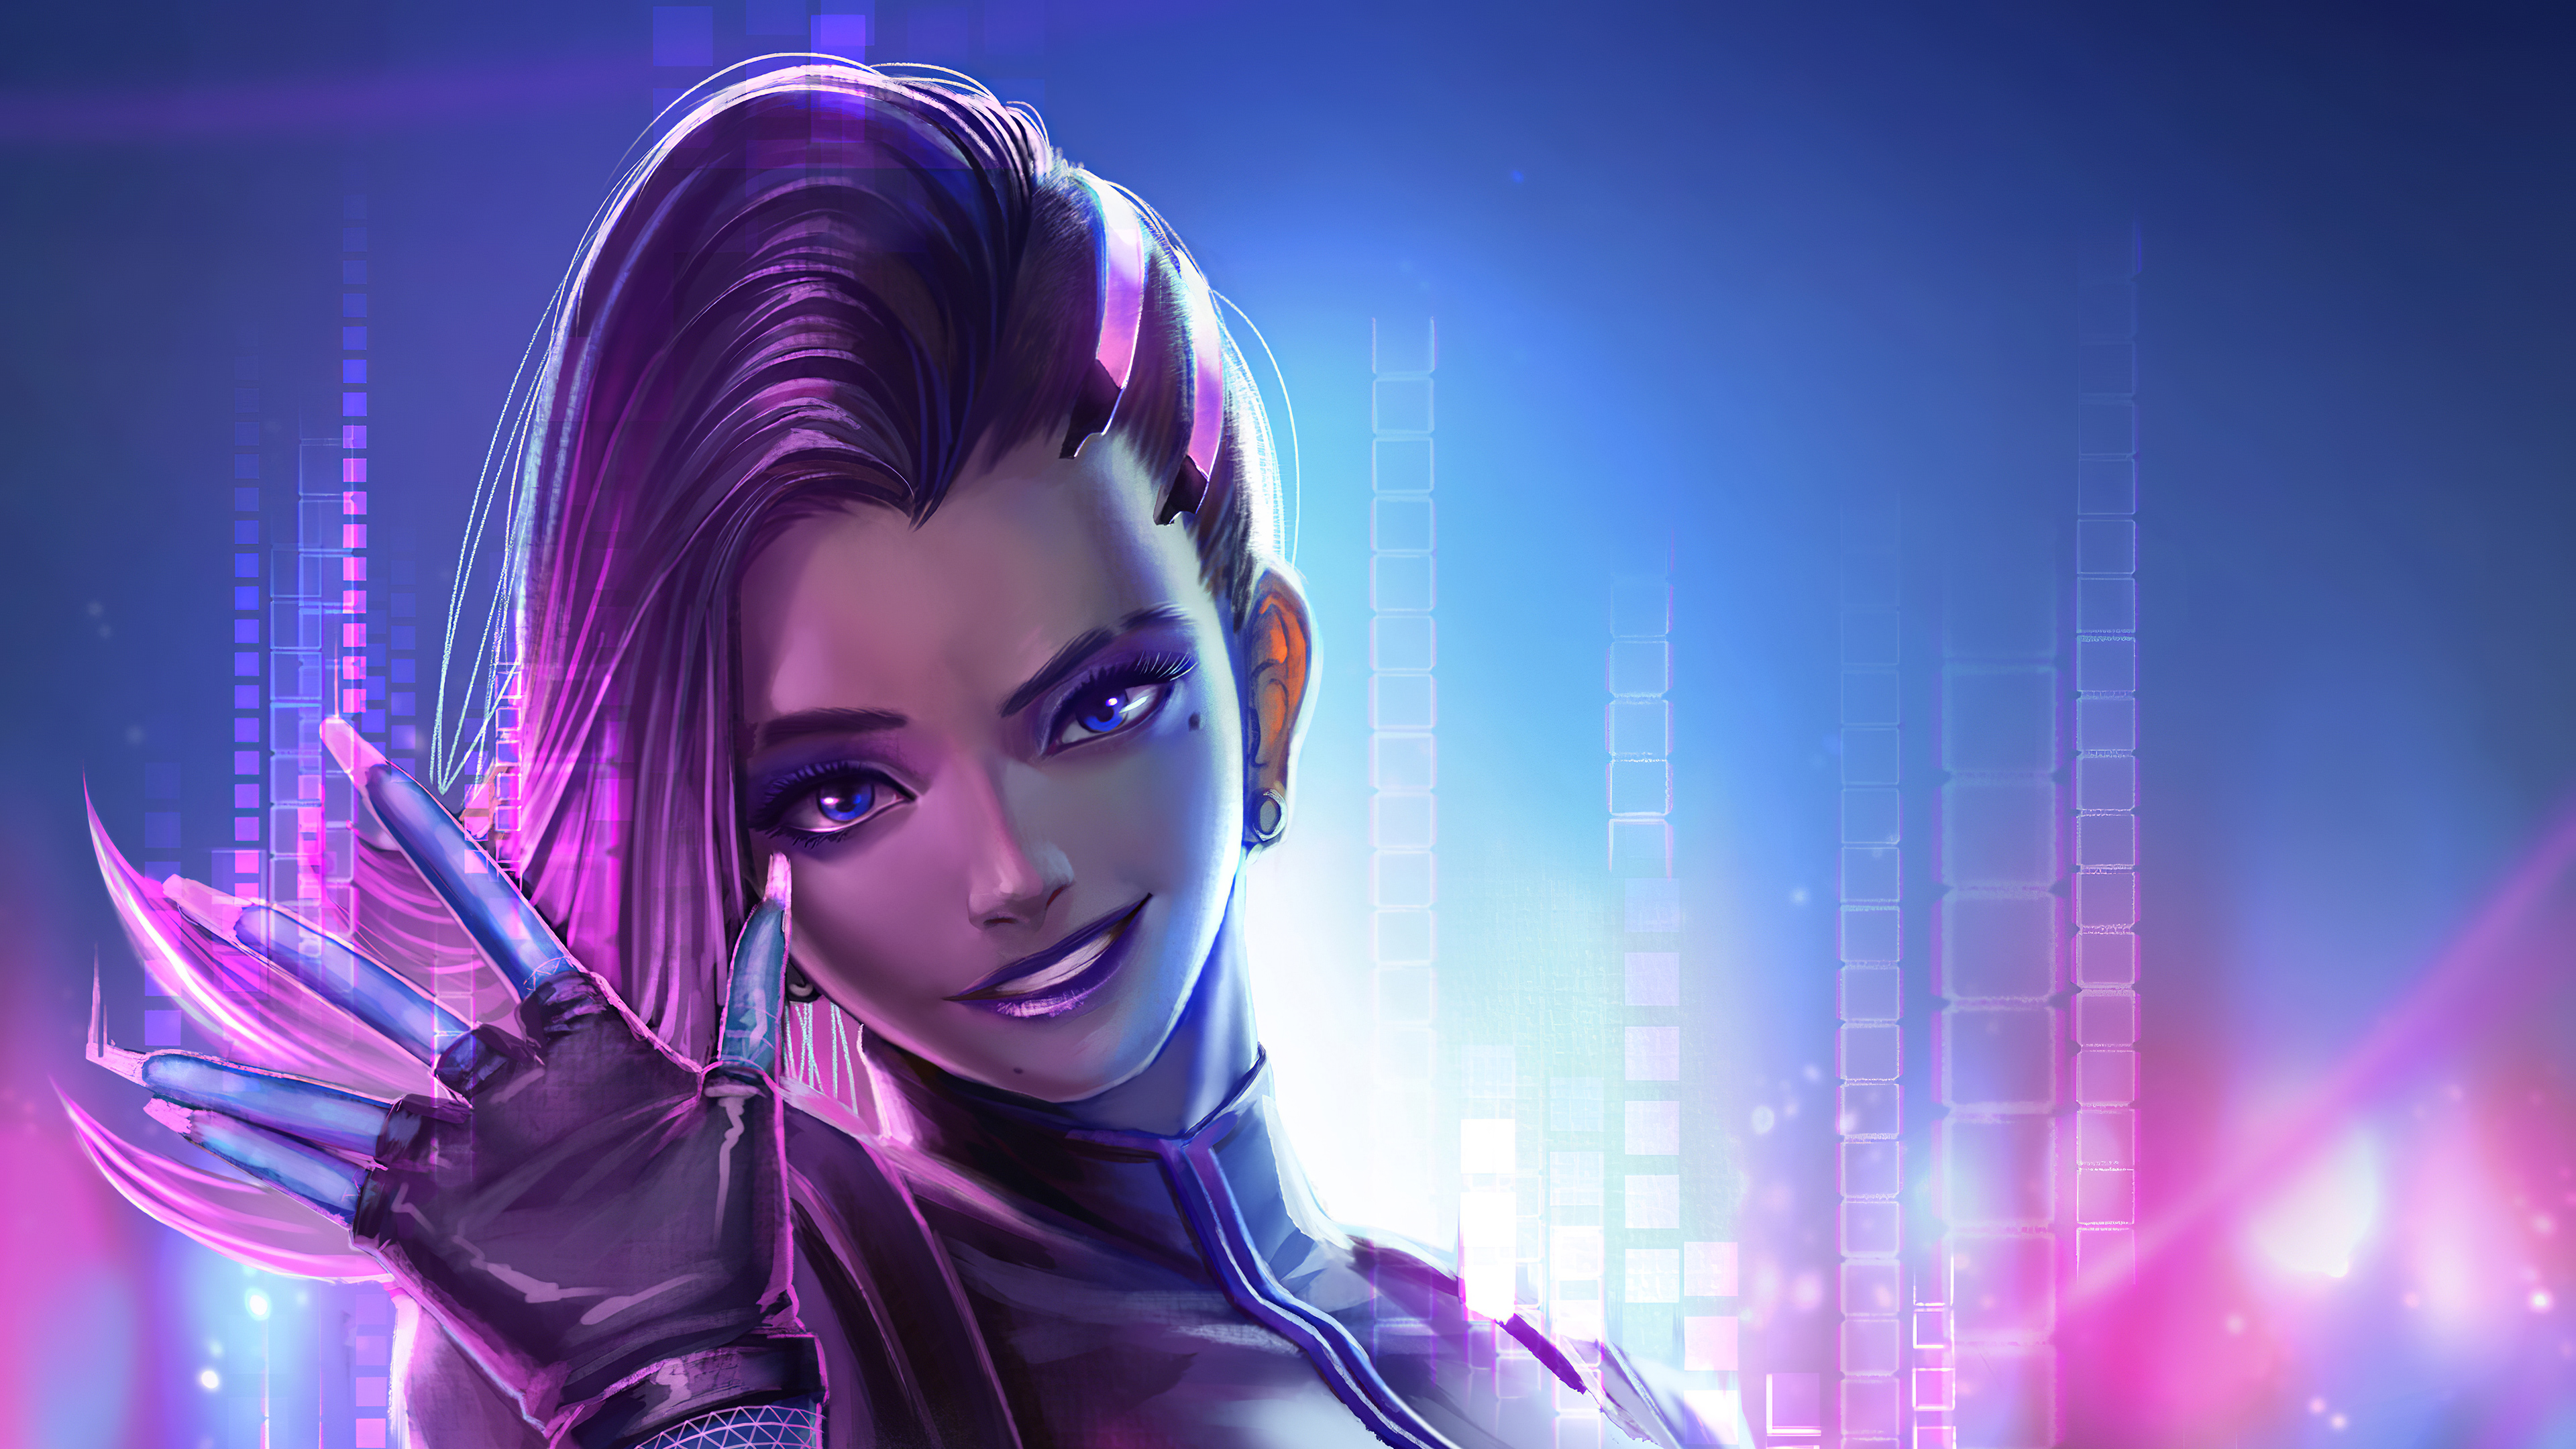 4k Sombra Overwatch Hd Games 4k Wallpapers Images Backgrounds Photos And Pictures